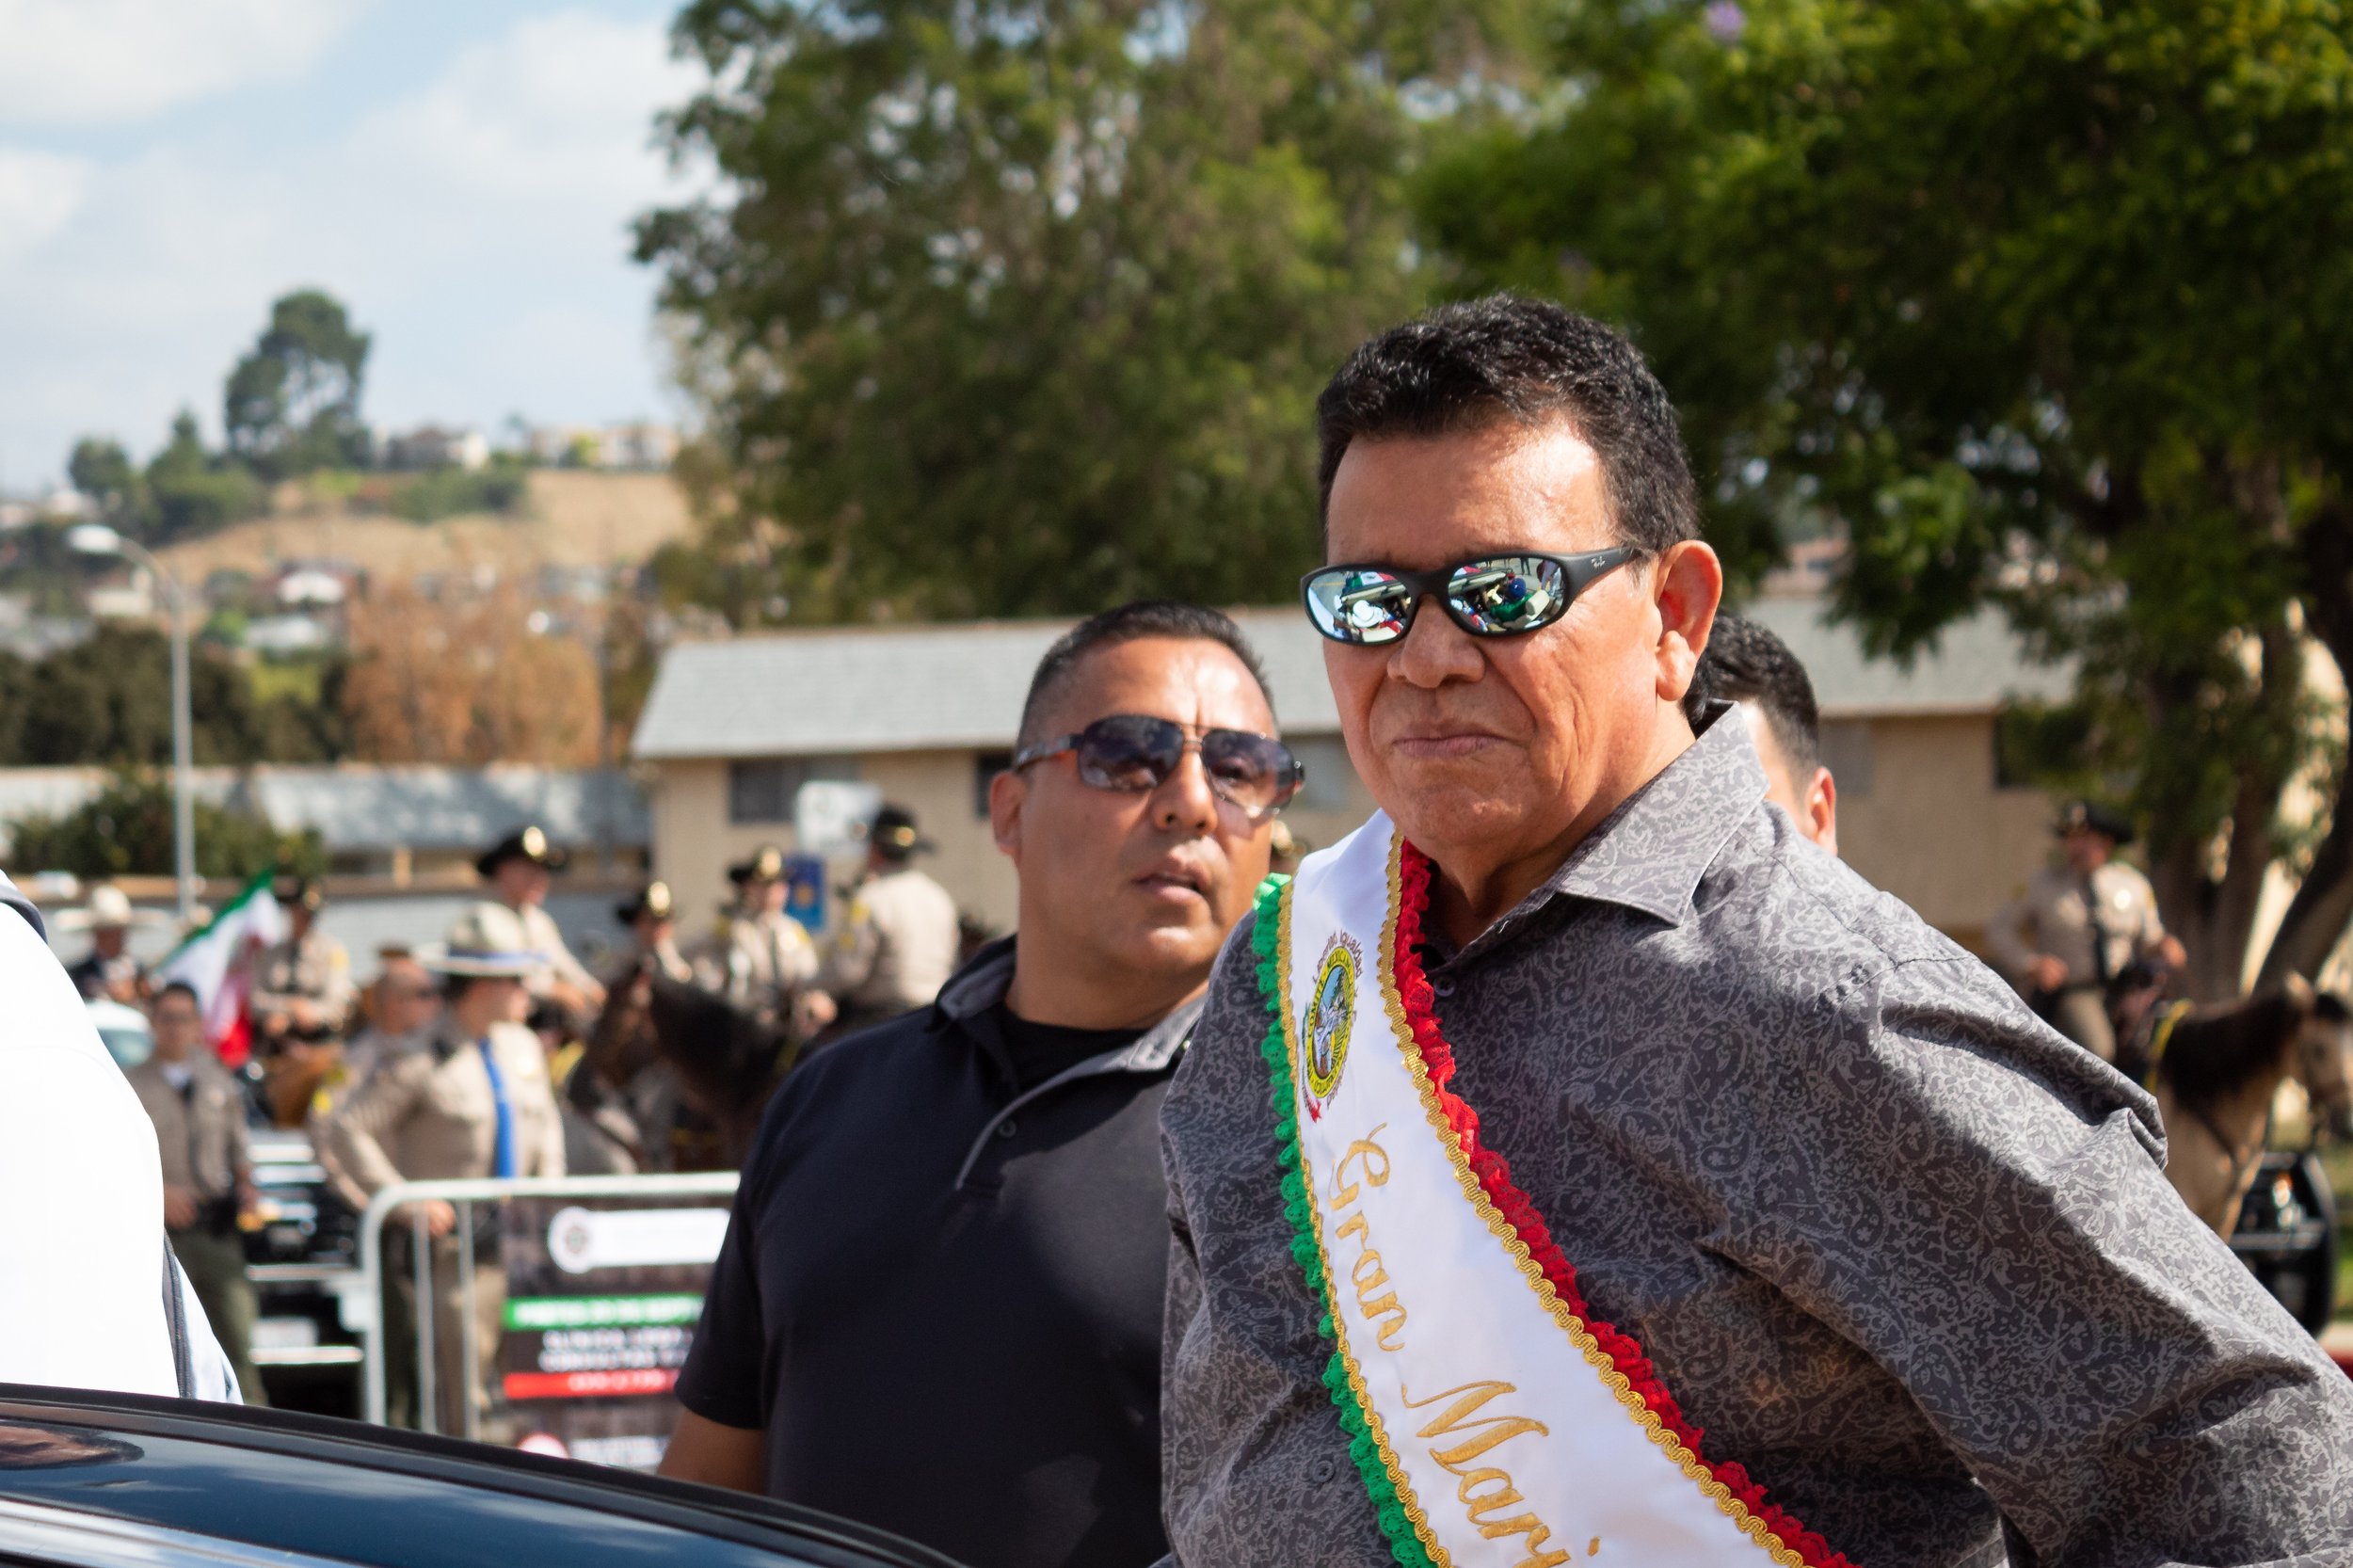  Fernando Valenzuela, a retired Los Angeles Dodgers pitcher (#34), riding on his float as the Grand Marshal for the  Mexican Independence Day Parade & Festival in East Los Angeles, Calif. on Sept. 18, 2022. (Caylo Seals | The Corsair) 